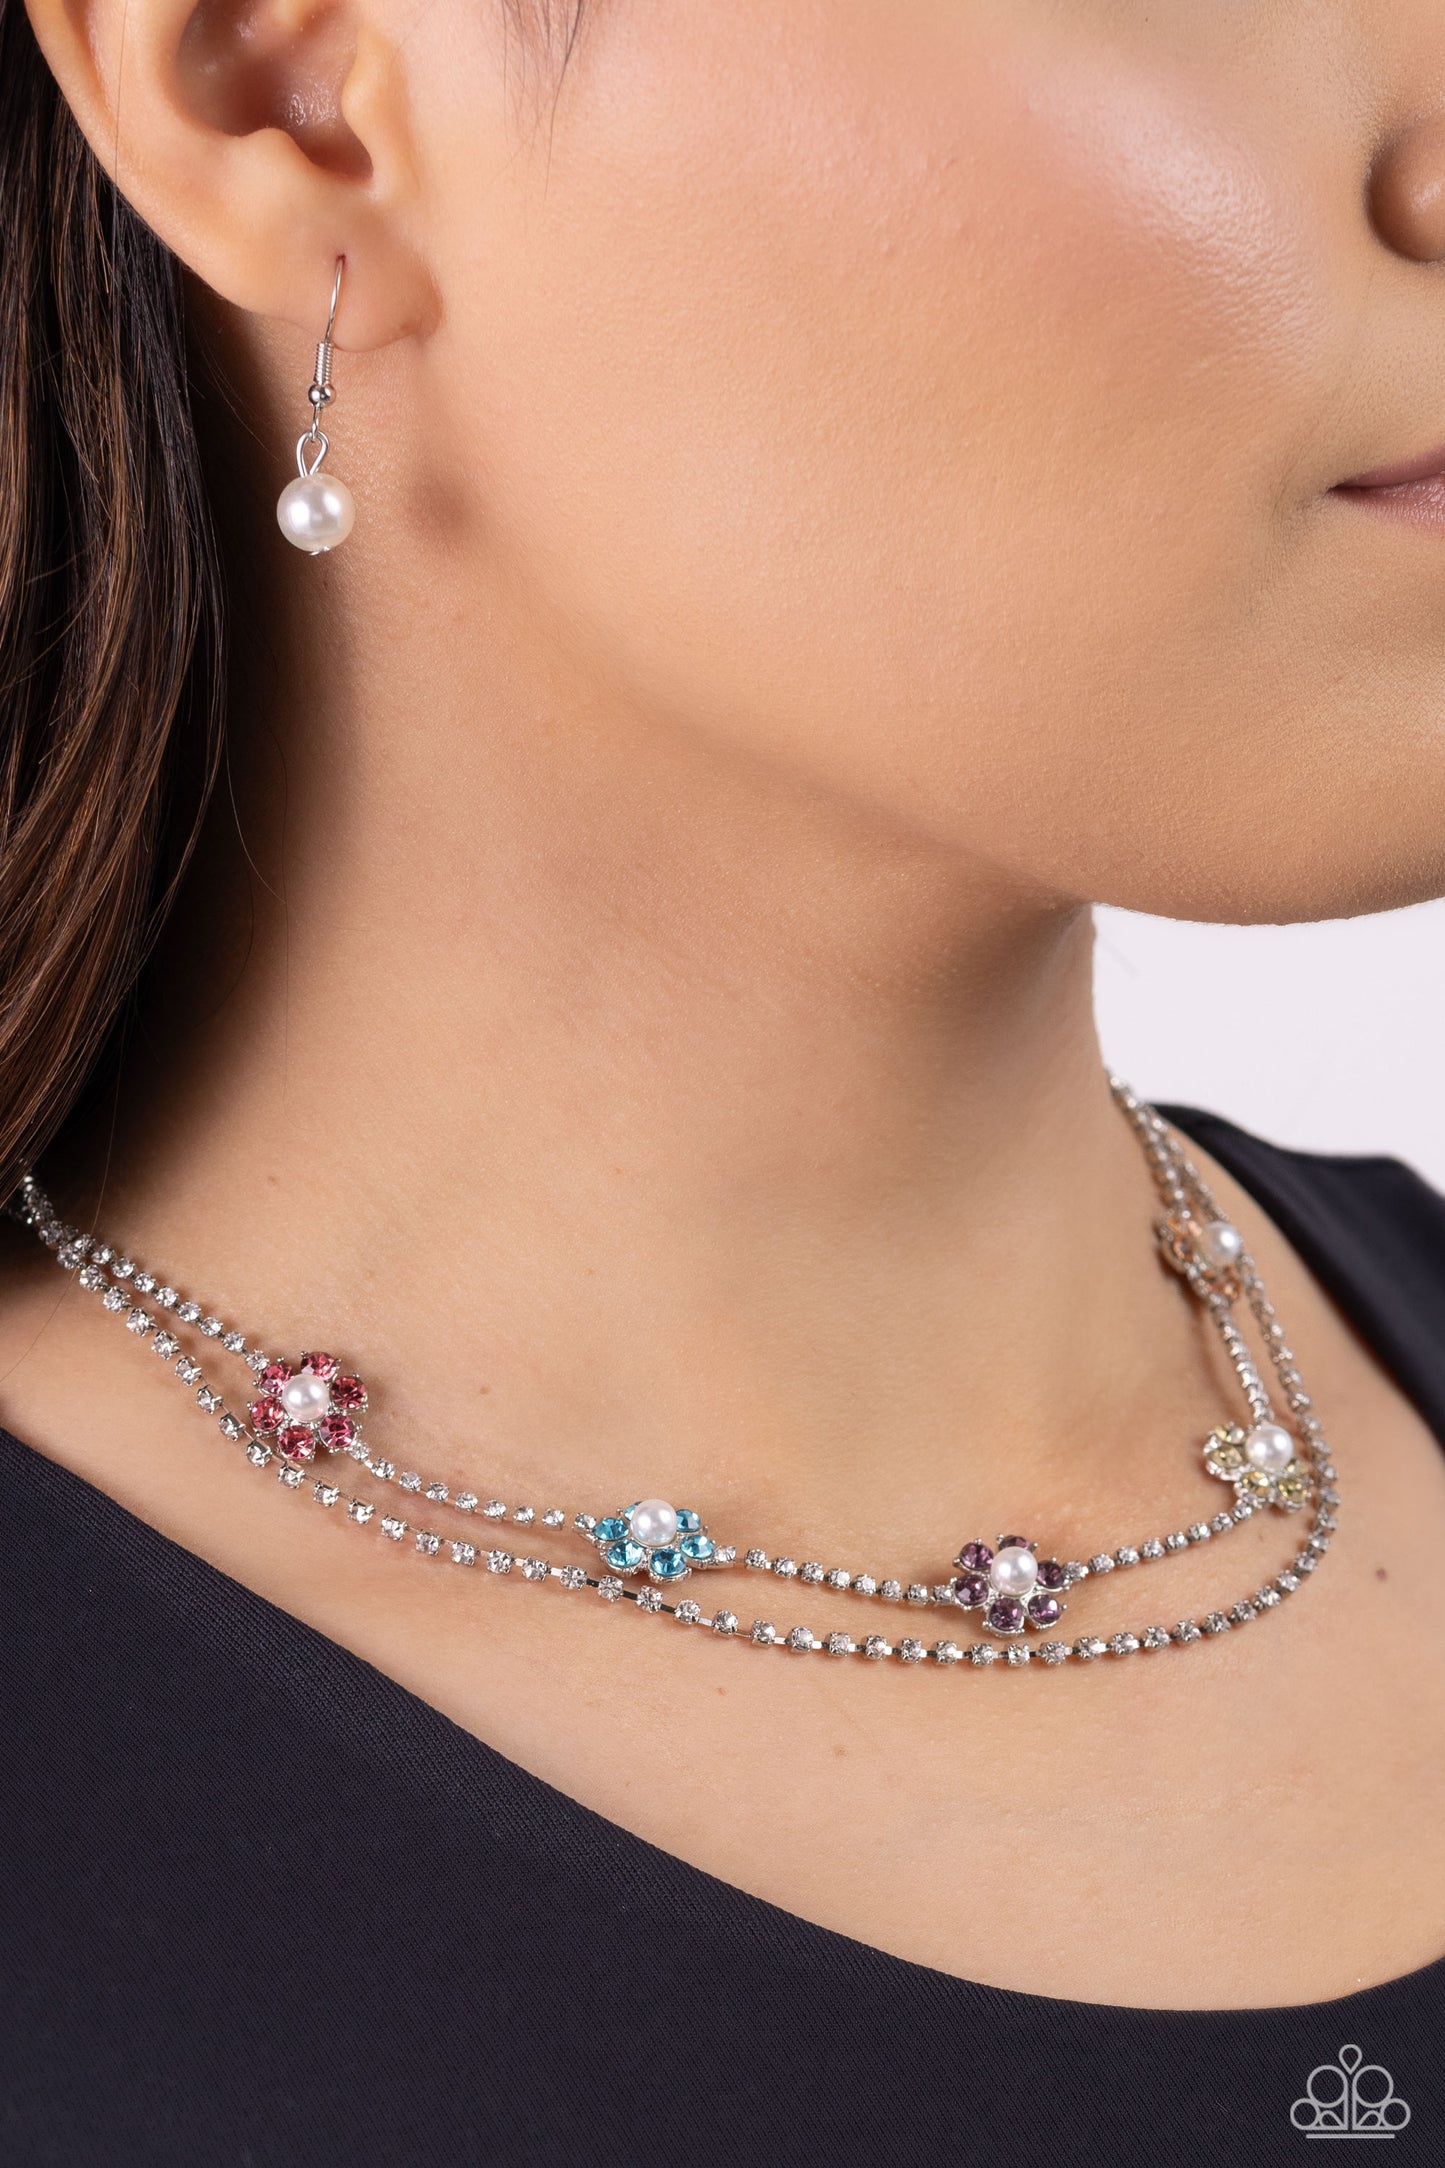 Paparazzi Accessories A SQUARE Beauty - Multi Featuring silver square fittings, white rhinestones cascade into two layers below the collar adding glitzy movement to the sparkling centerpiece. Infused along the uppermost chain, a glitzy collection of pearl